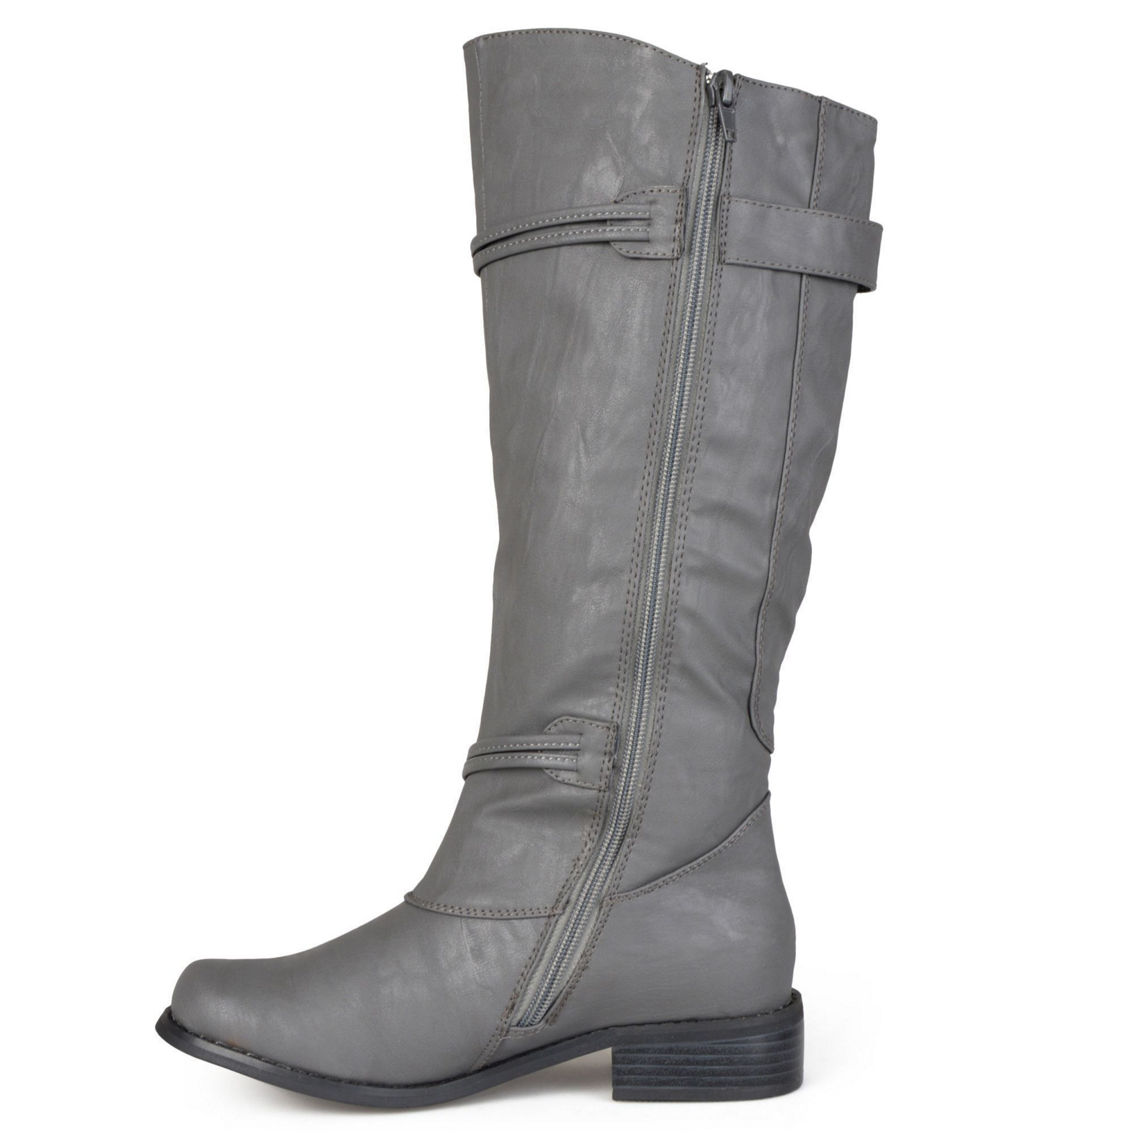 Journee Collection Women's Harley Boot - Image 4 of 5